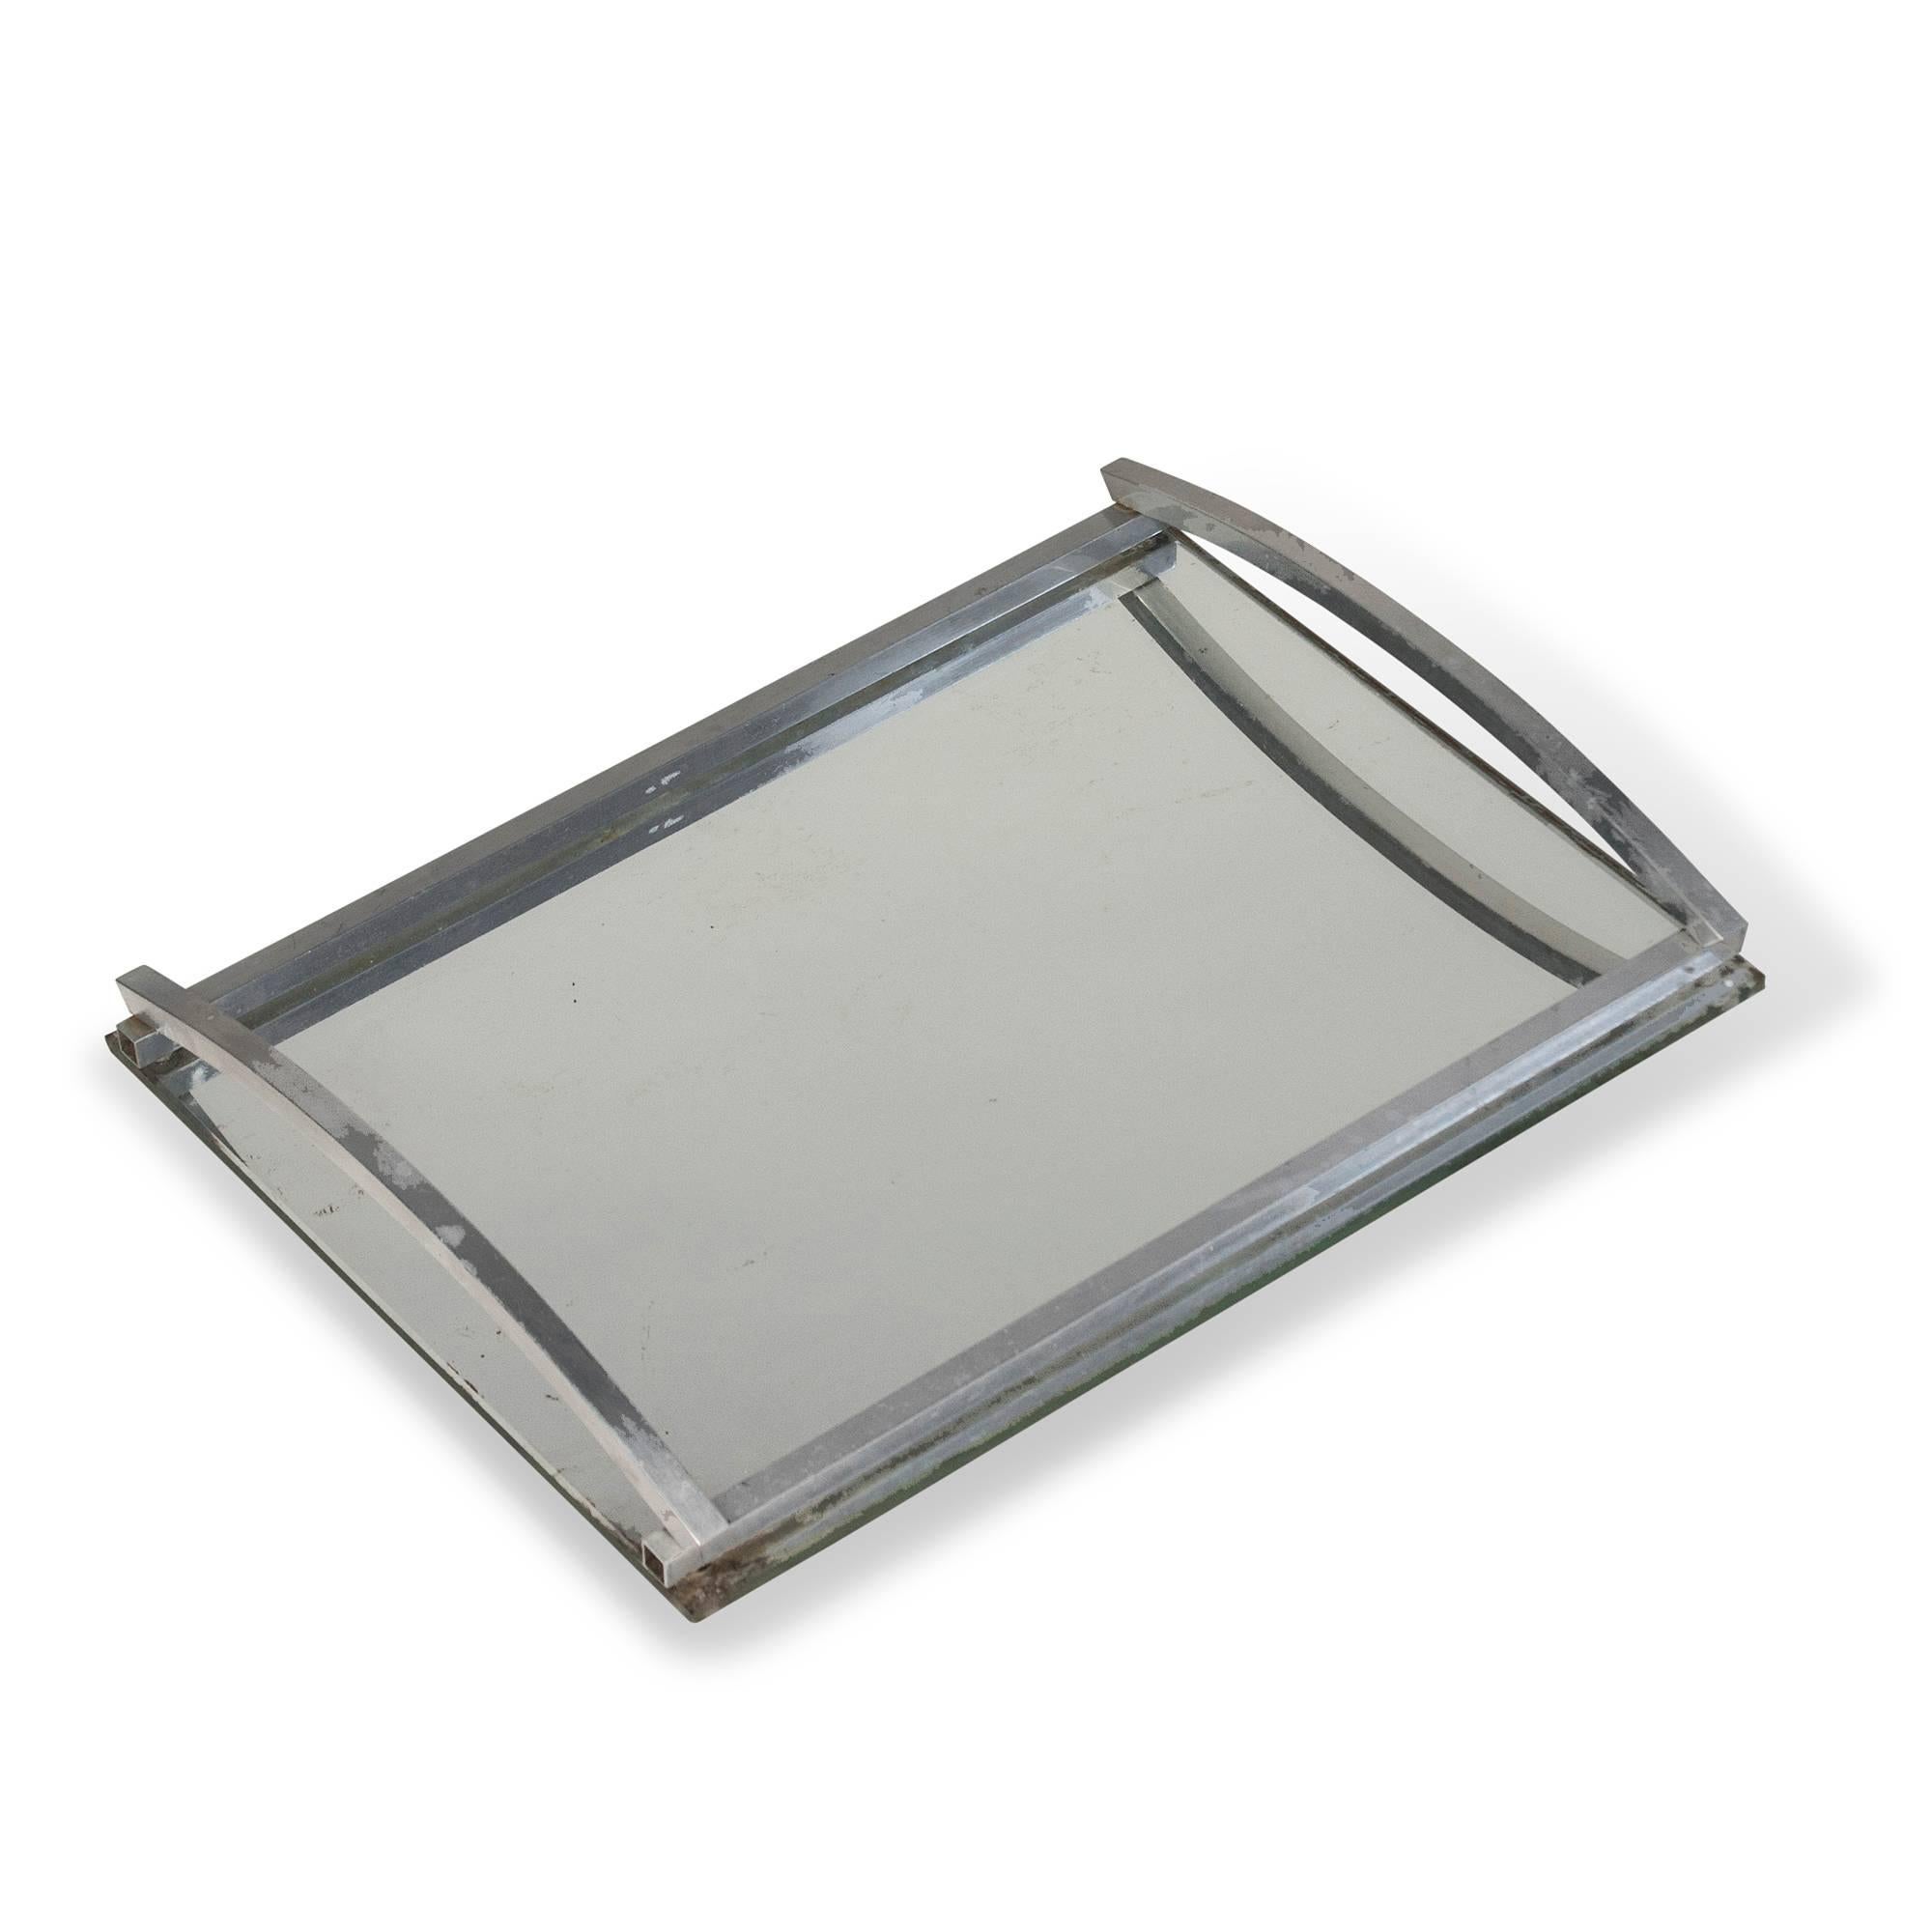 Nickeled frame mirror surface serving tray, with arced raised end handles, French, 1930s. Measures: 14 in x 10.6 in. 